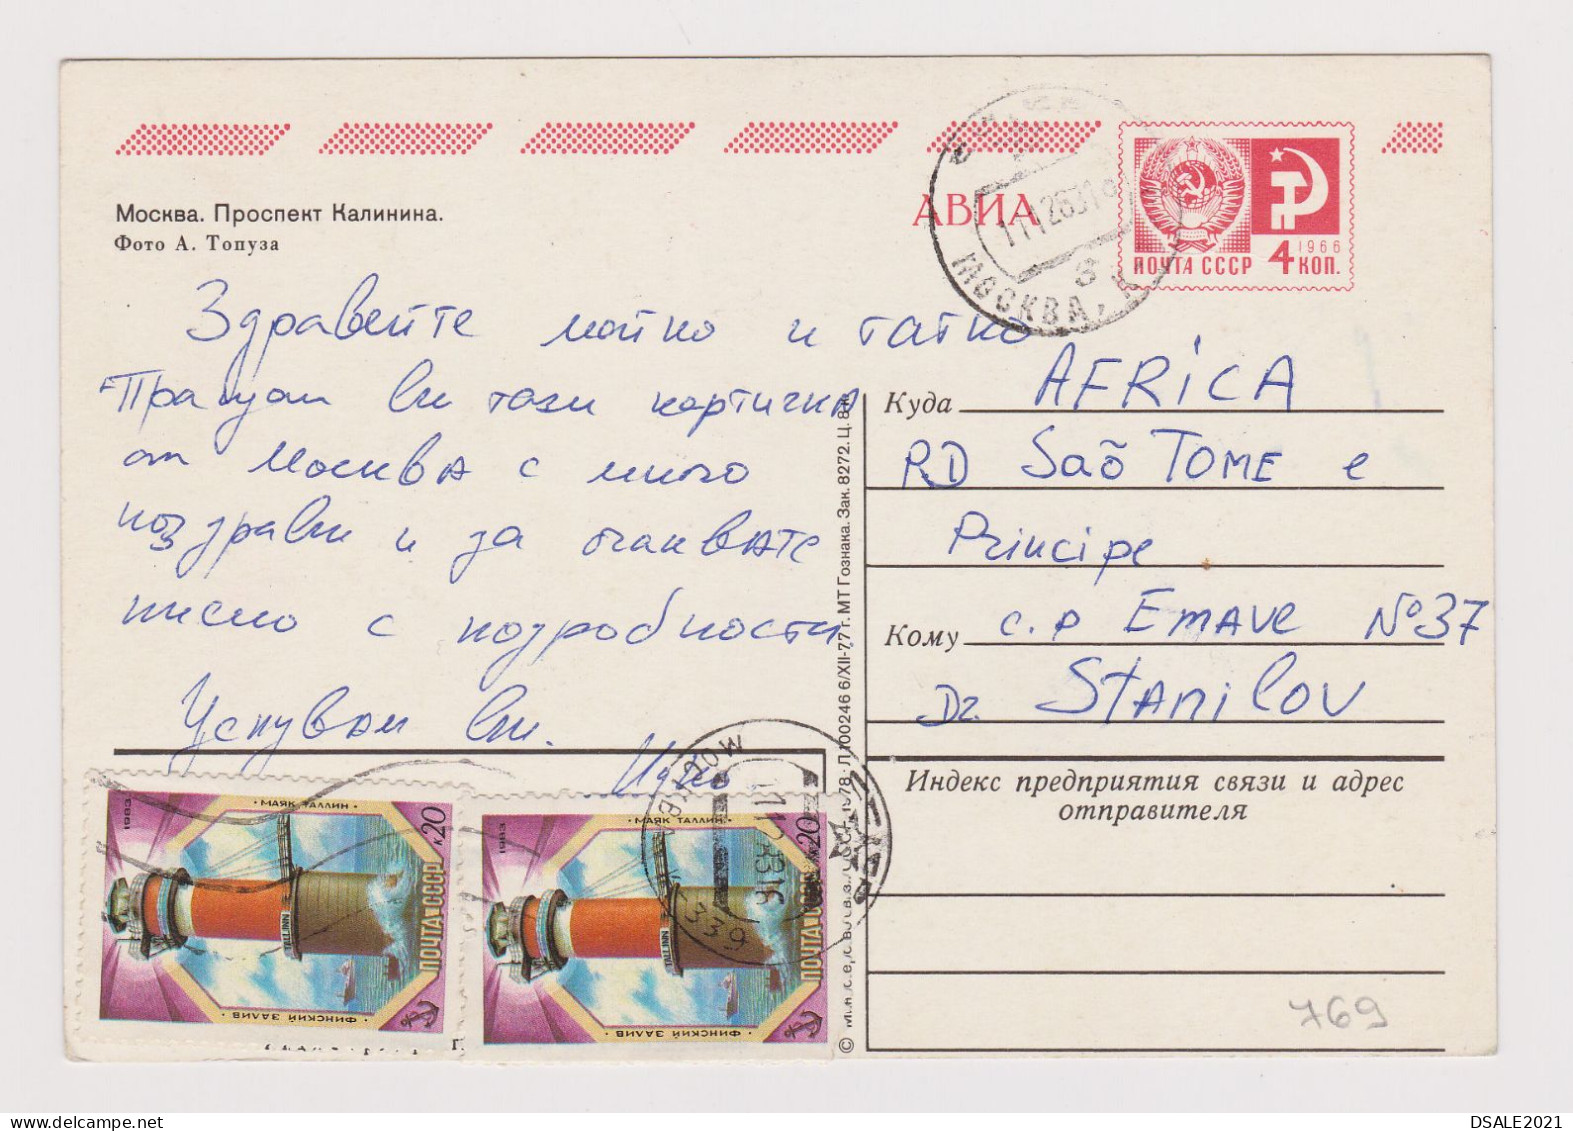 Russia USSR, 1970s Postal Stationery Card, Entier, MOSCOW View, W/Topic Stamps-LIGHTHOUSE Sent Abroad To Africa (769) - 1970-79